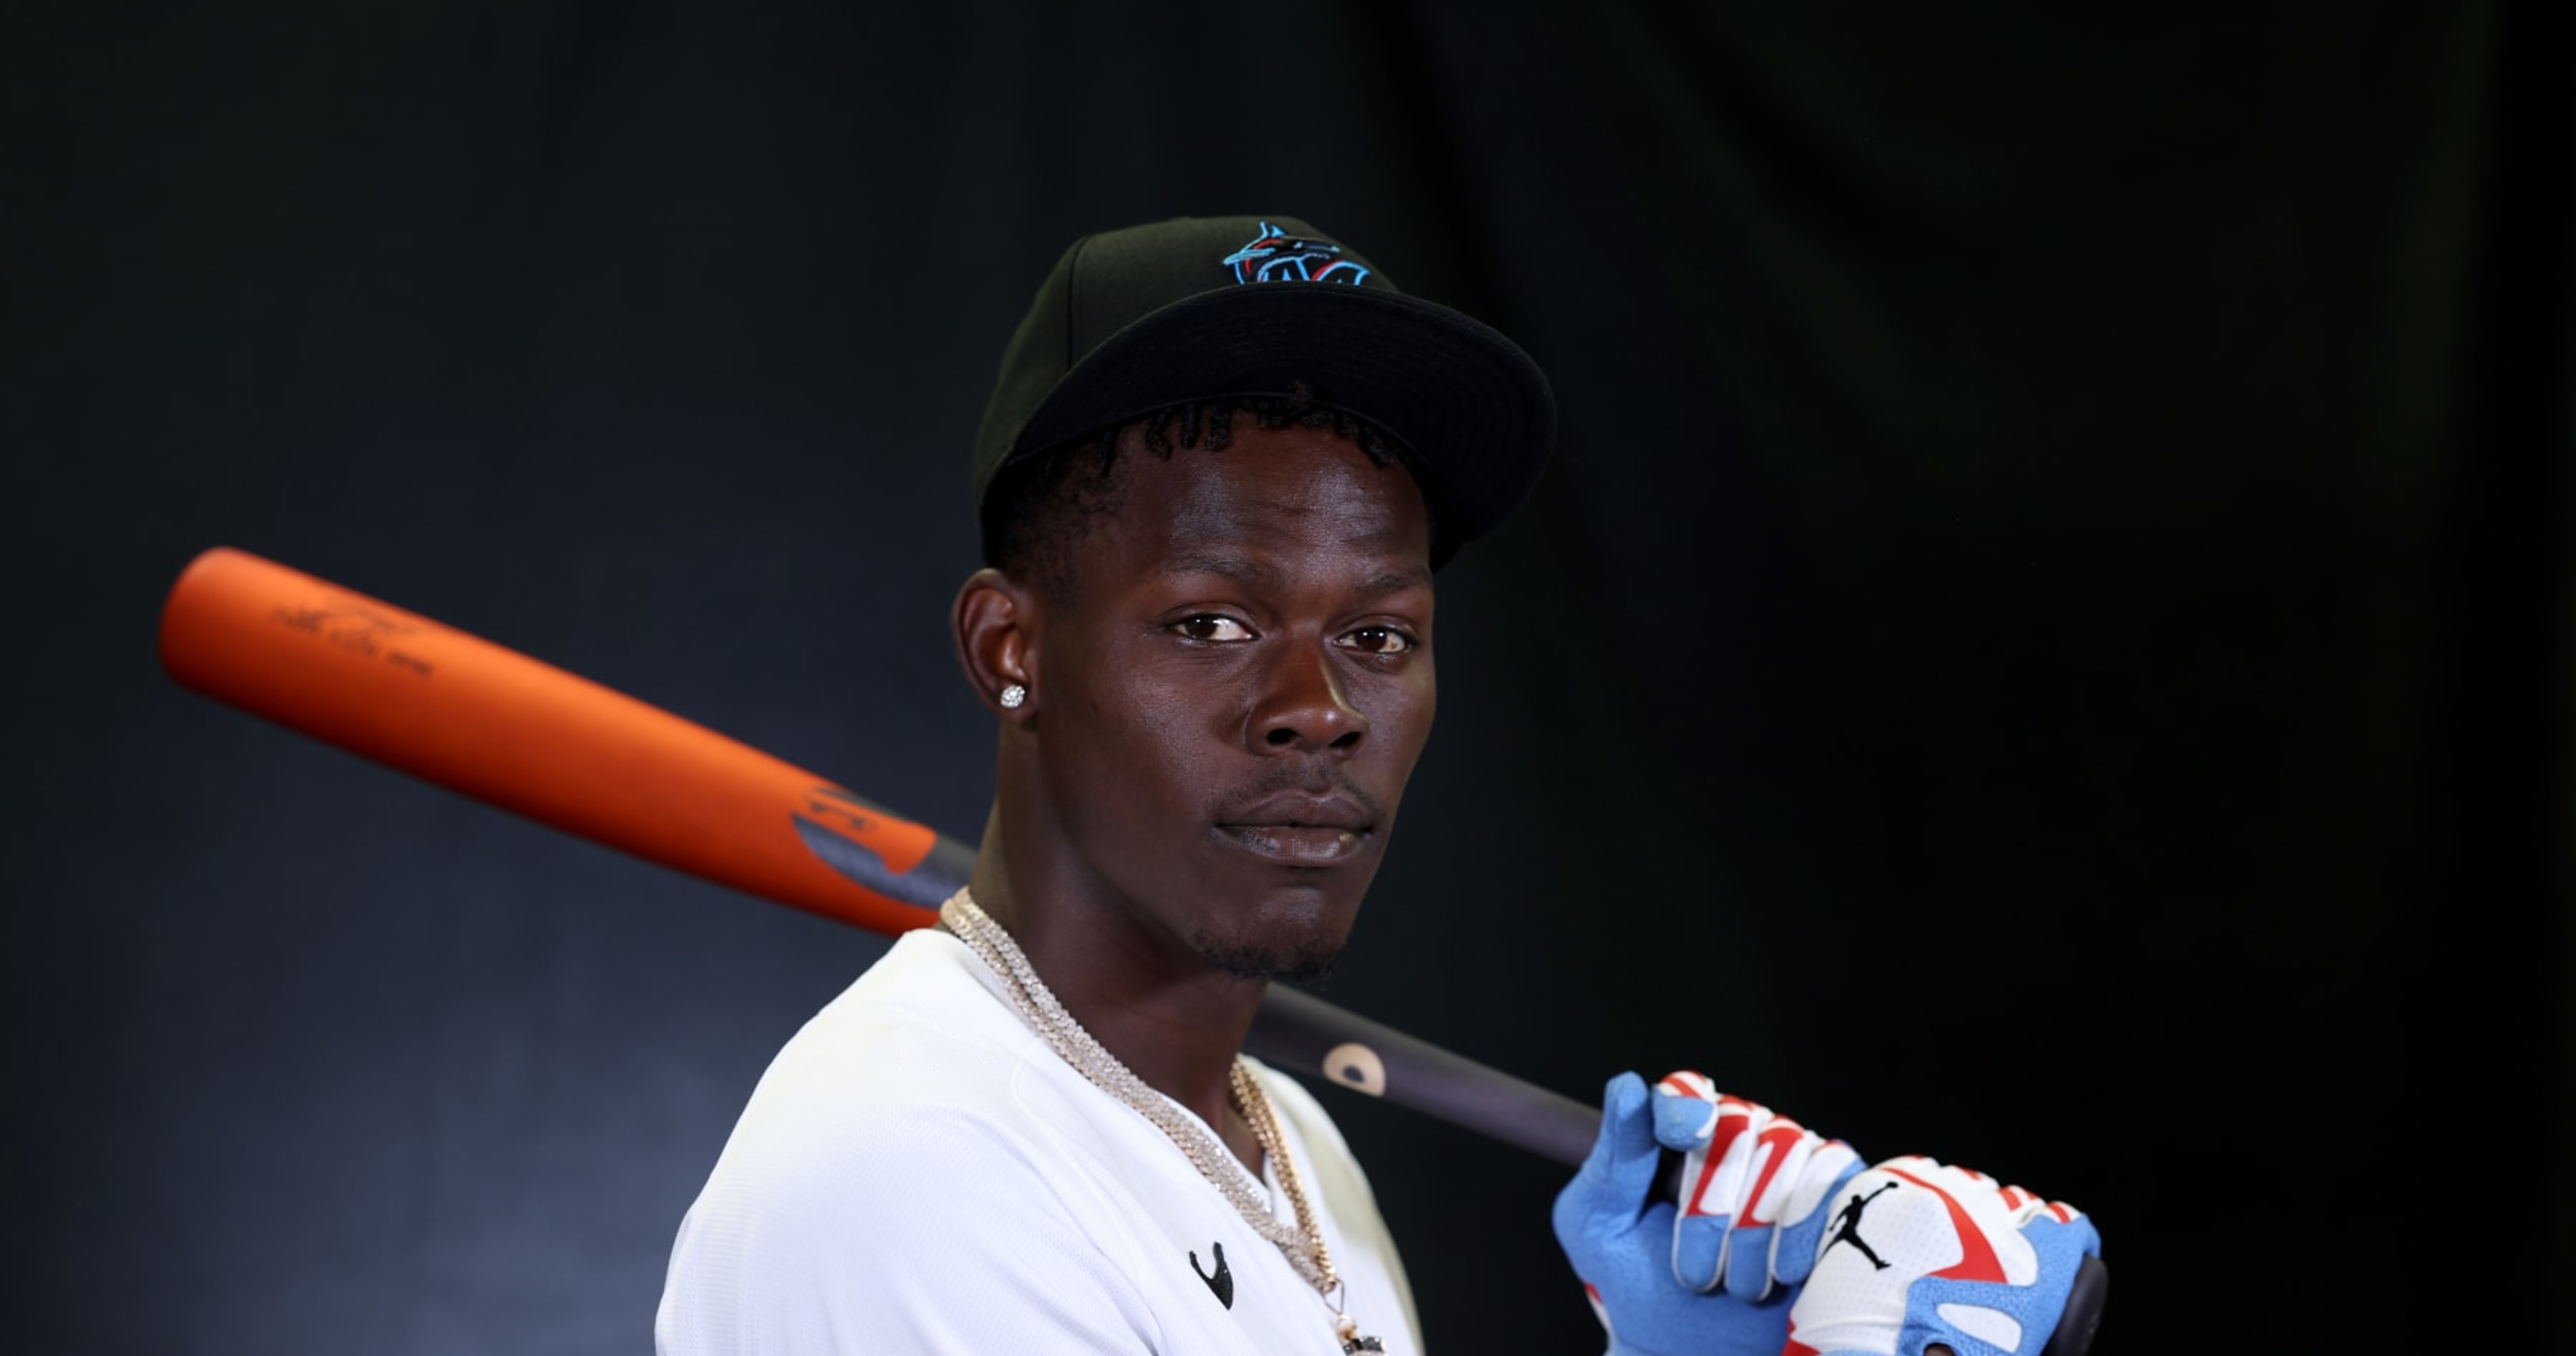 Jazz Chisholm Jr. #2 of the Miami Marlins prepares to bat in the game  News Photo - Getty Images